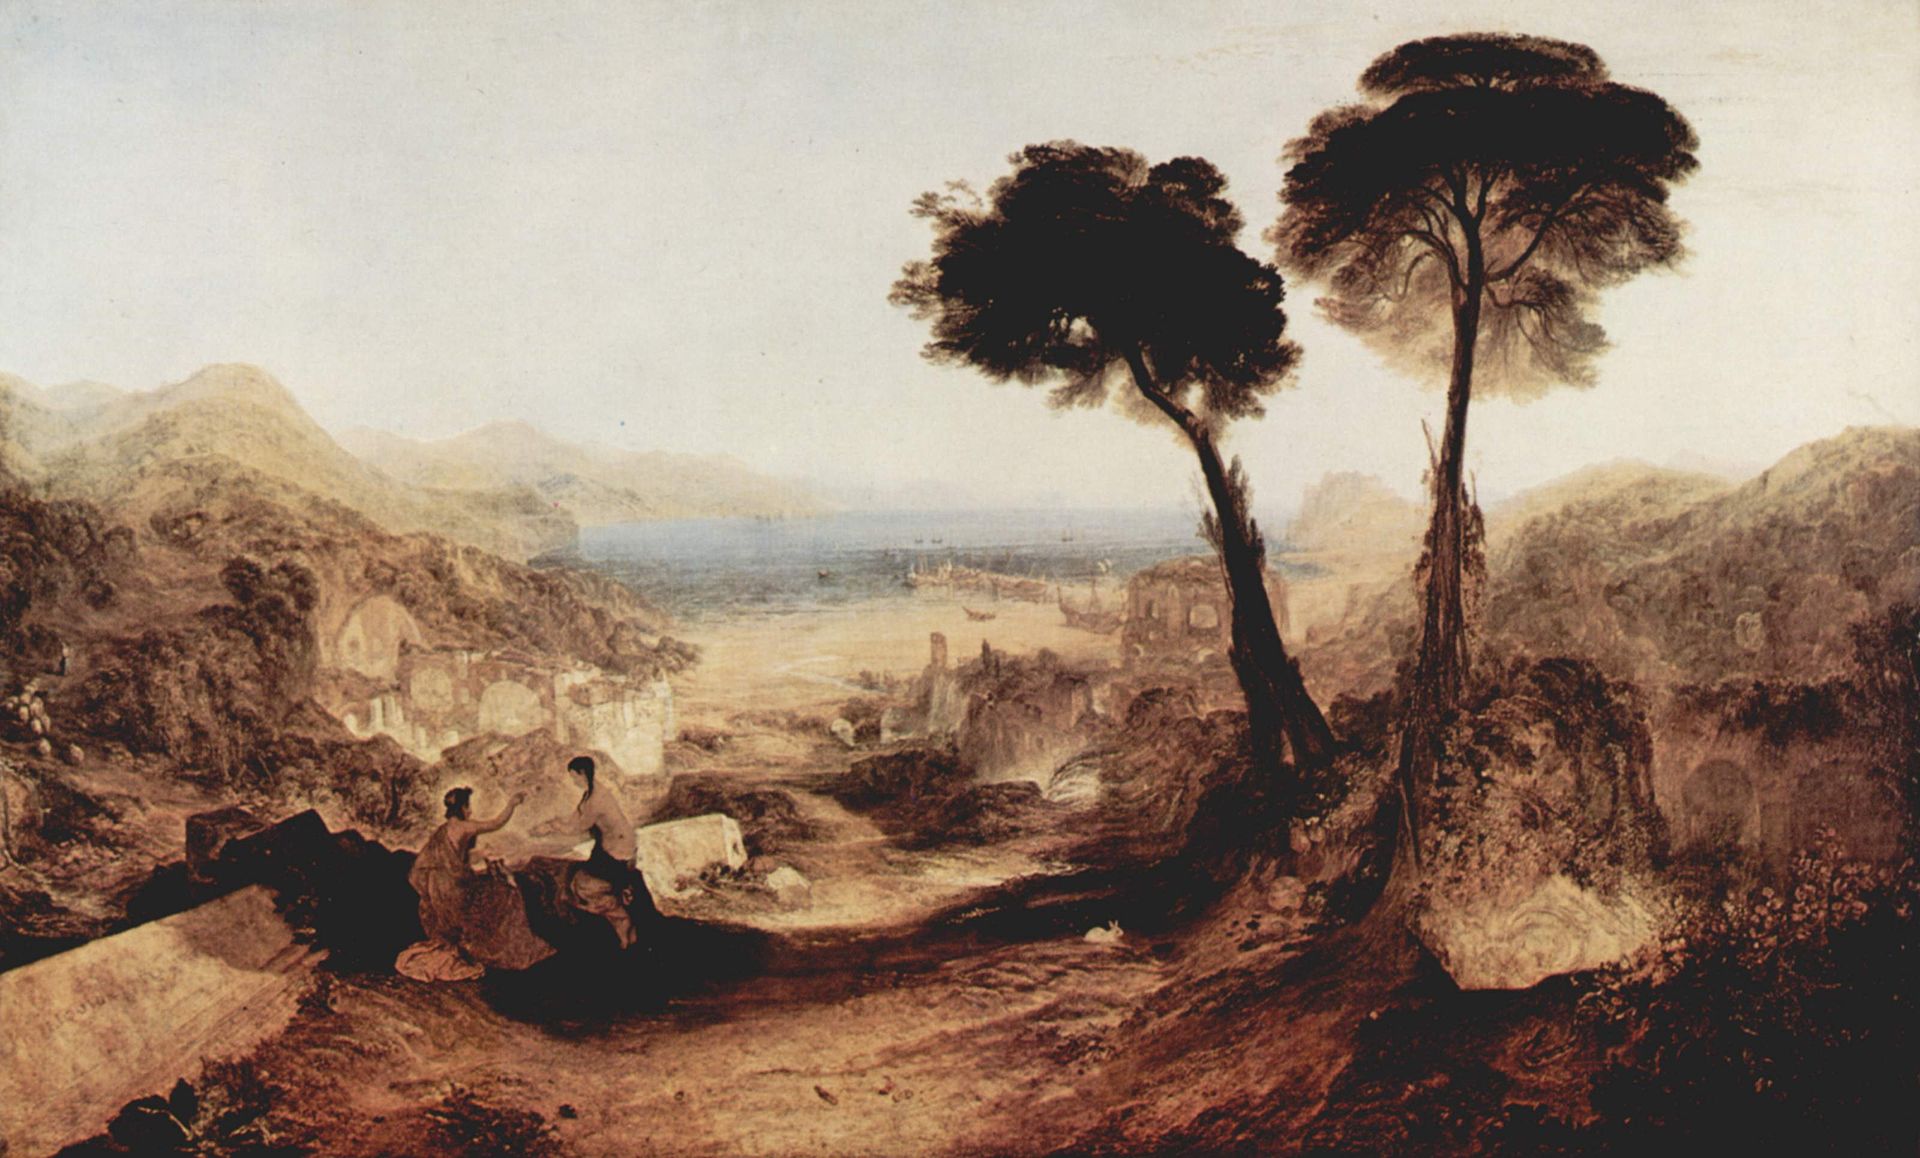 An artist's impression of the landscape of Baiae before it drowned below the waves.